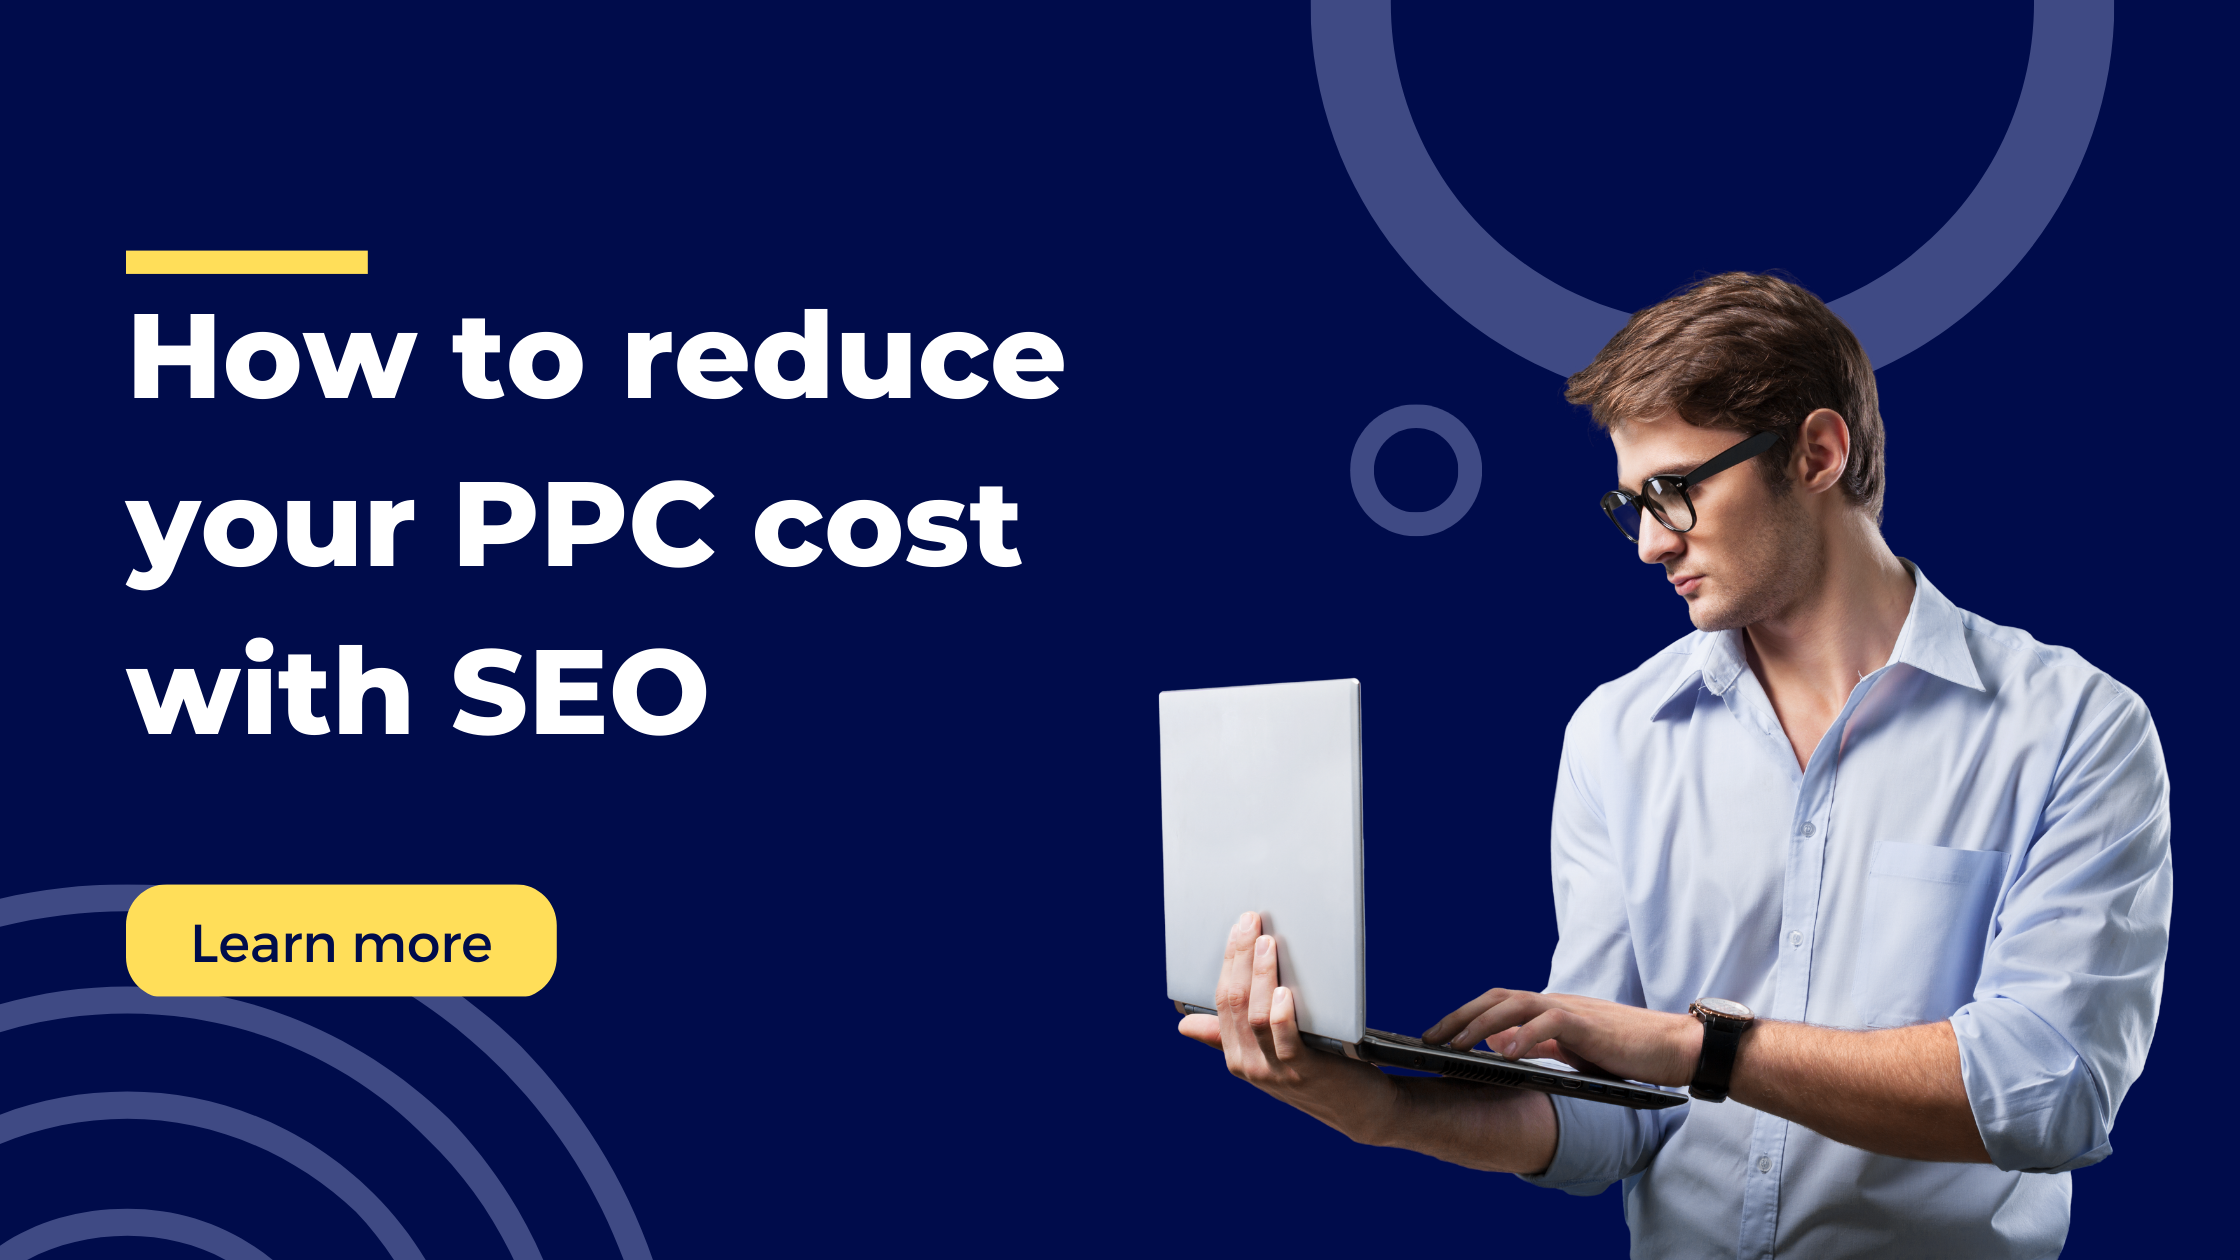 How to reduce your PPC cost with SEO